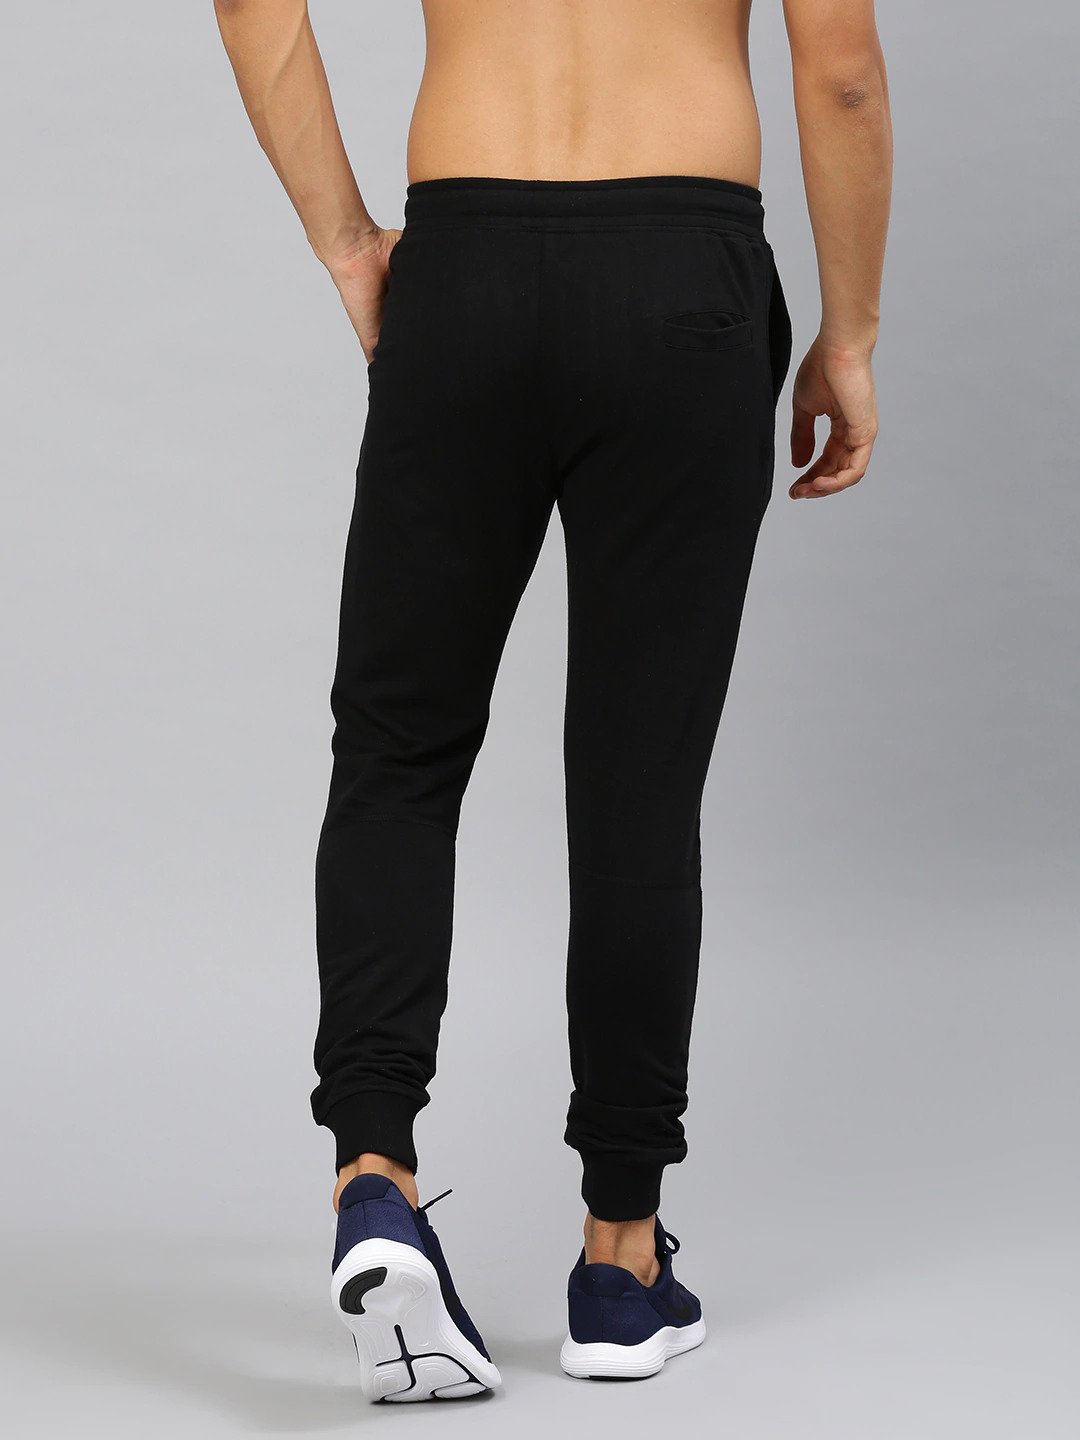 Buy Men's Track Pant Online @ ₹299 from ShopClues